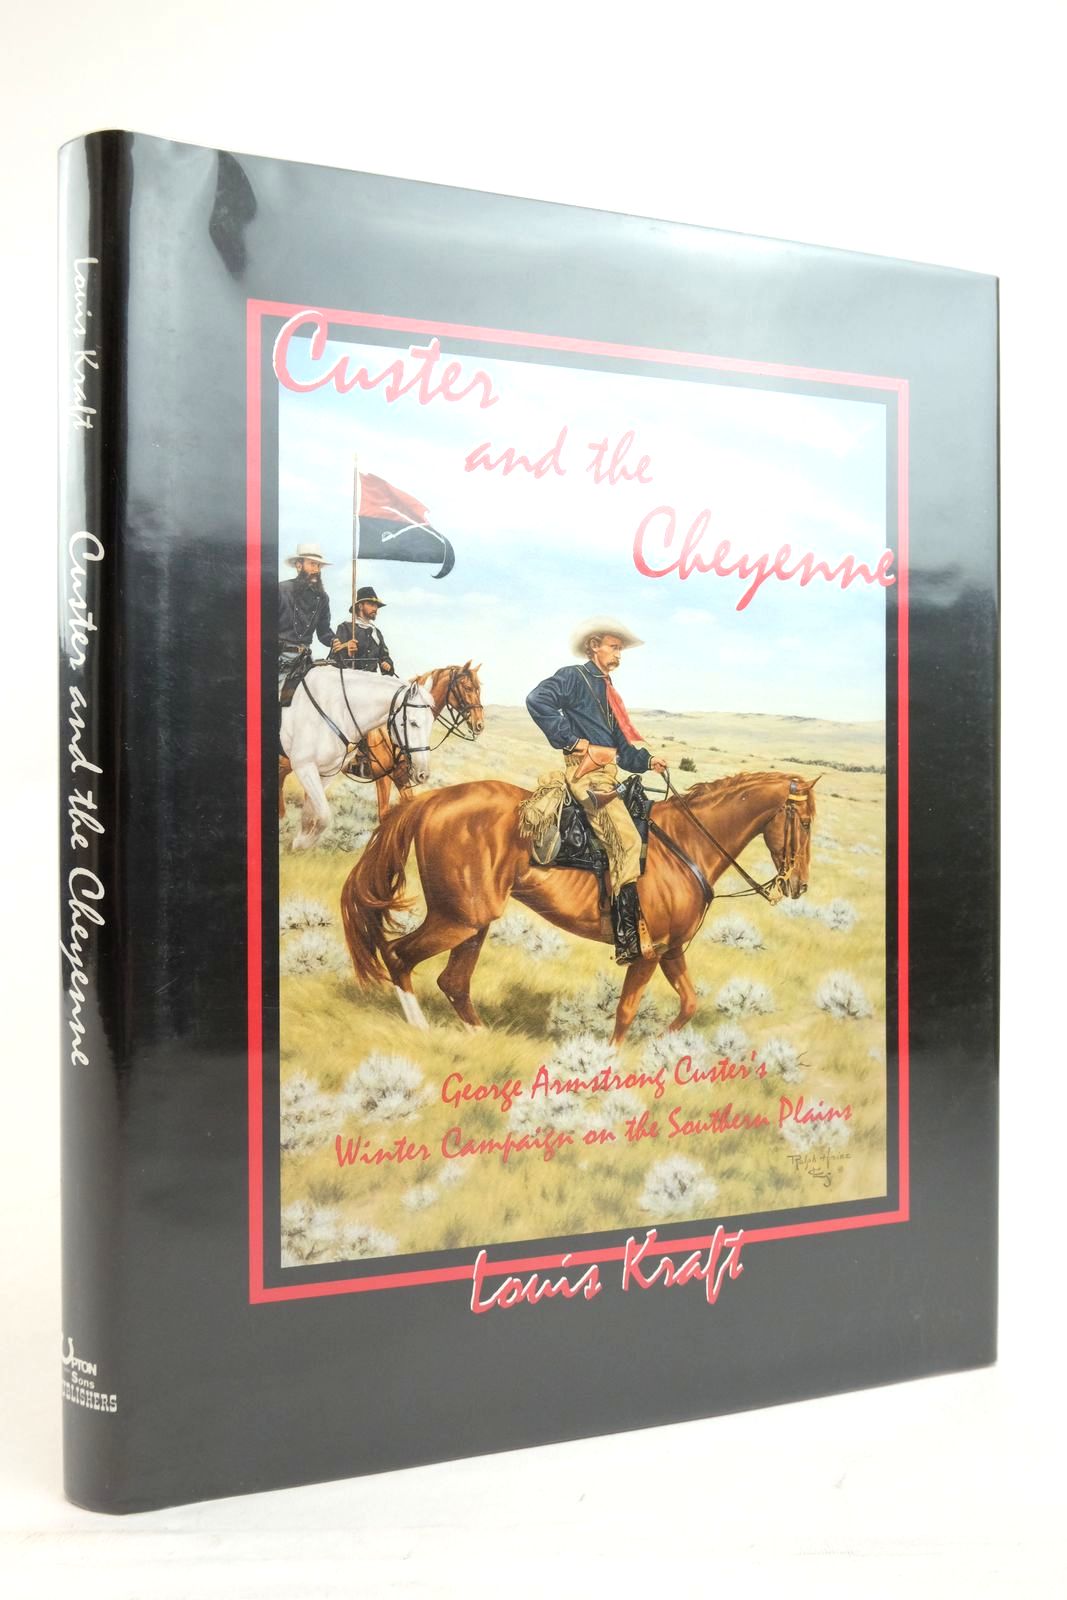 Custer and The Cheyenne